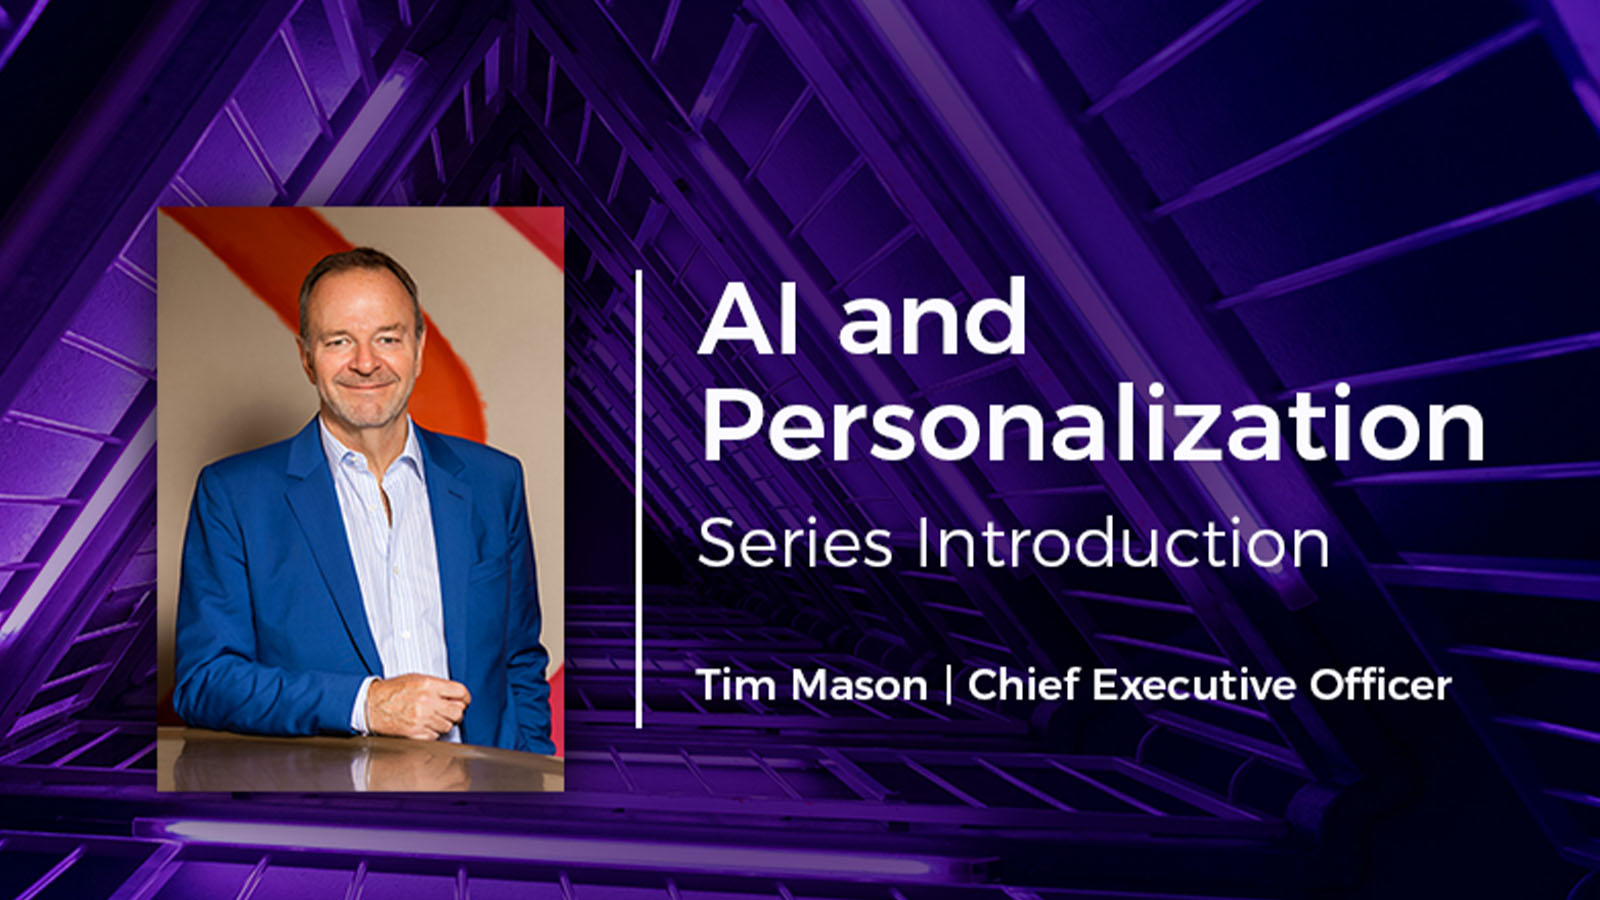 AI and Personalization Series Introduction by Tim Mason